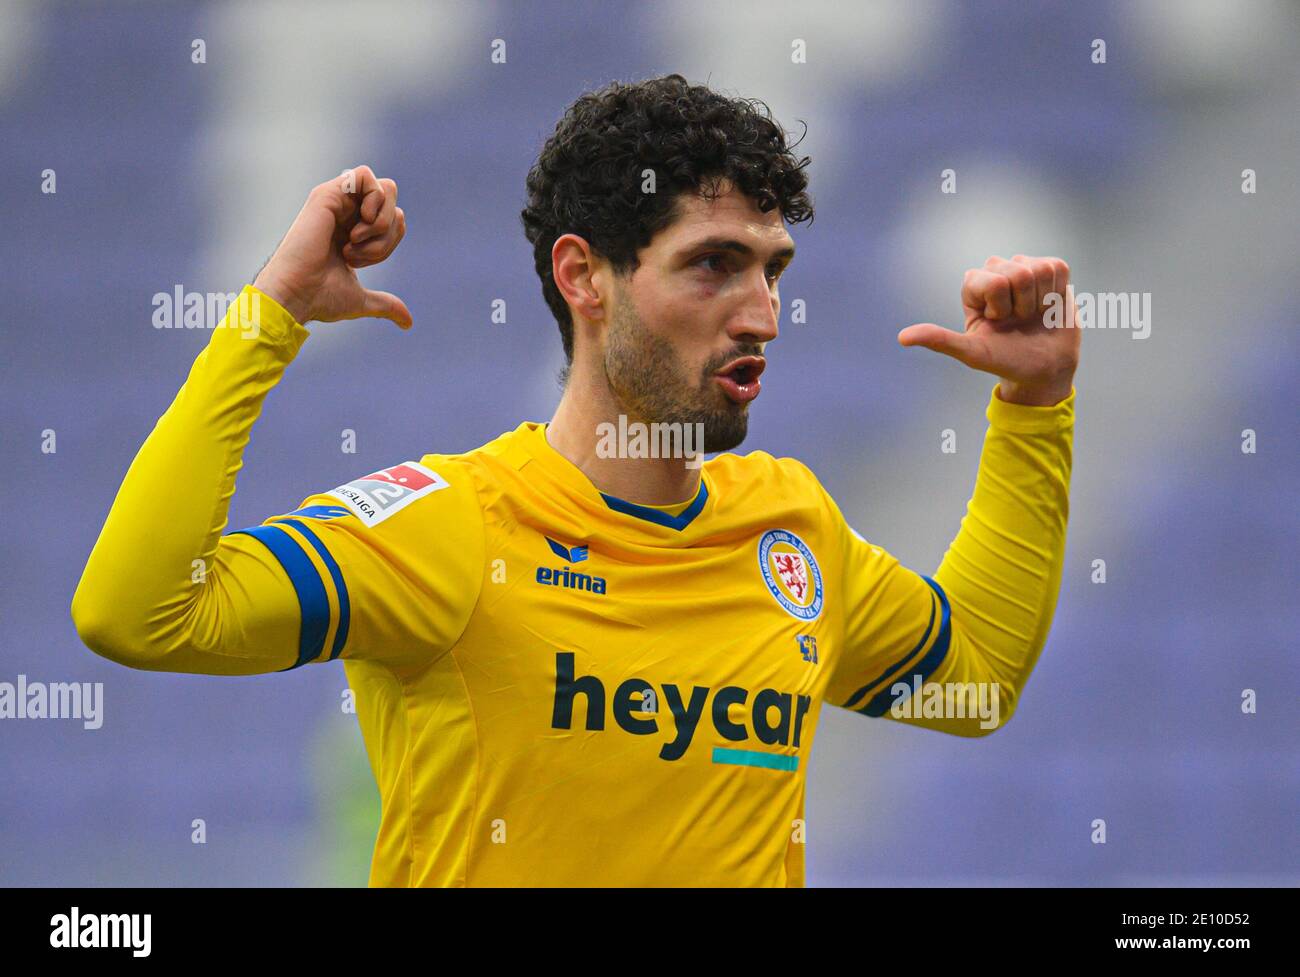 Aue, Germany. 03rd Jan, 2021. Football: 2. Bundesliga, FC Erzgebirge Aue - Eintracht Braunschweig, Matchday 14, at Erzgebirgsstadion. Braunschweig's Fabio Kaufmann celebrates after his goal to make it 0:1. Credit: Robert Michael/dpa-Zentralbild/dpa - IMPORTANT NOTE: In accordance with the regulations of the DFL Deutsche Fußball Liga and/or the DFB Deutscher Fußball-Bund, it is prohibited to use or have used photographs taken in the stadium and/or of the match in the form of sequence pictures and/or video-like photo series./dpa/Alamy Live News Stock Photo